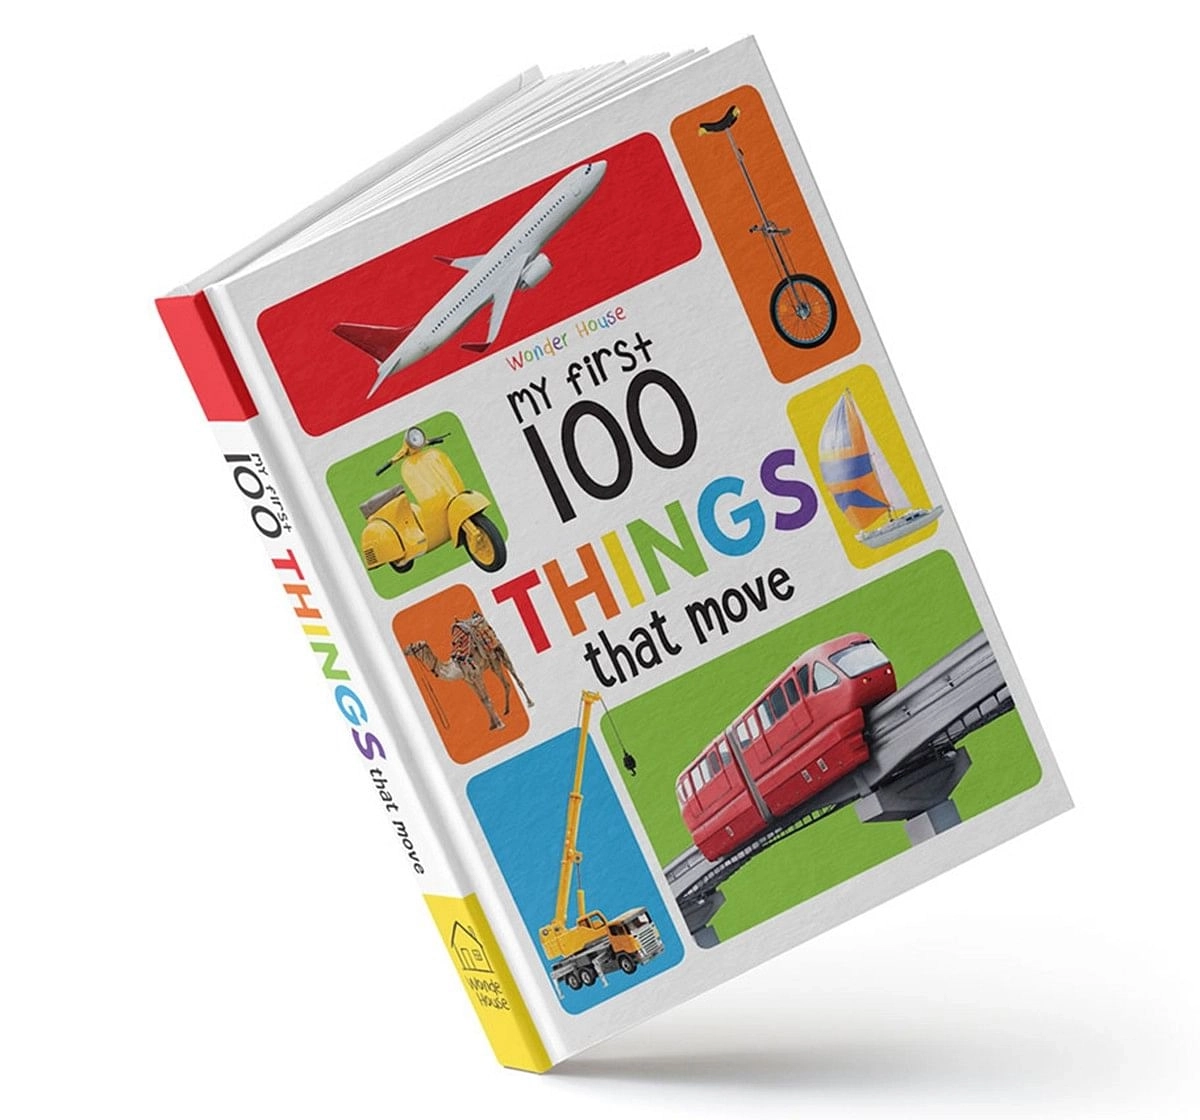 My First 100 Things That Move Book, 24 Pages Book By Wonder House Books, Board Book